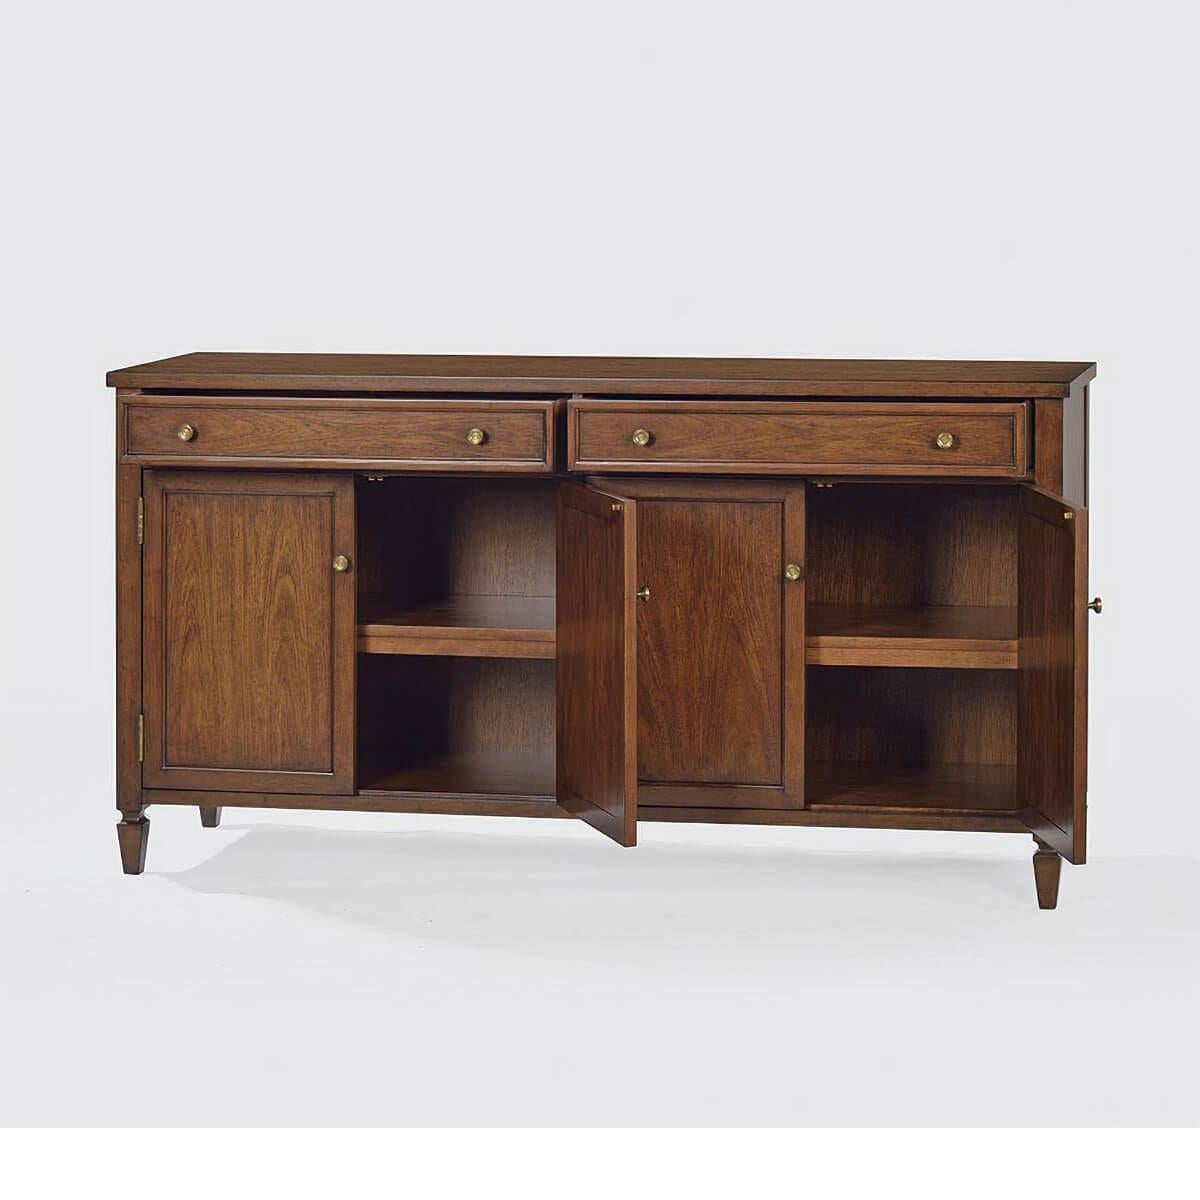 Classic style sideboard with a warm 'rustic' walnut finish. The sideboard has two wide drawers over two pairs of panel doors, shelves, burnished brass hardware, a smooth top, and a finish with subtle visual distressing.

Dimensions: 64